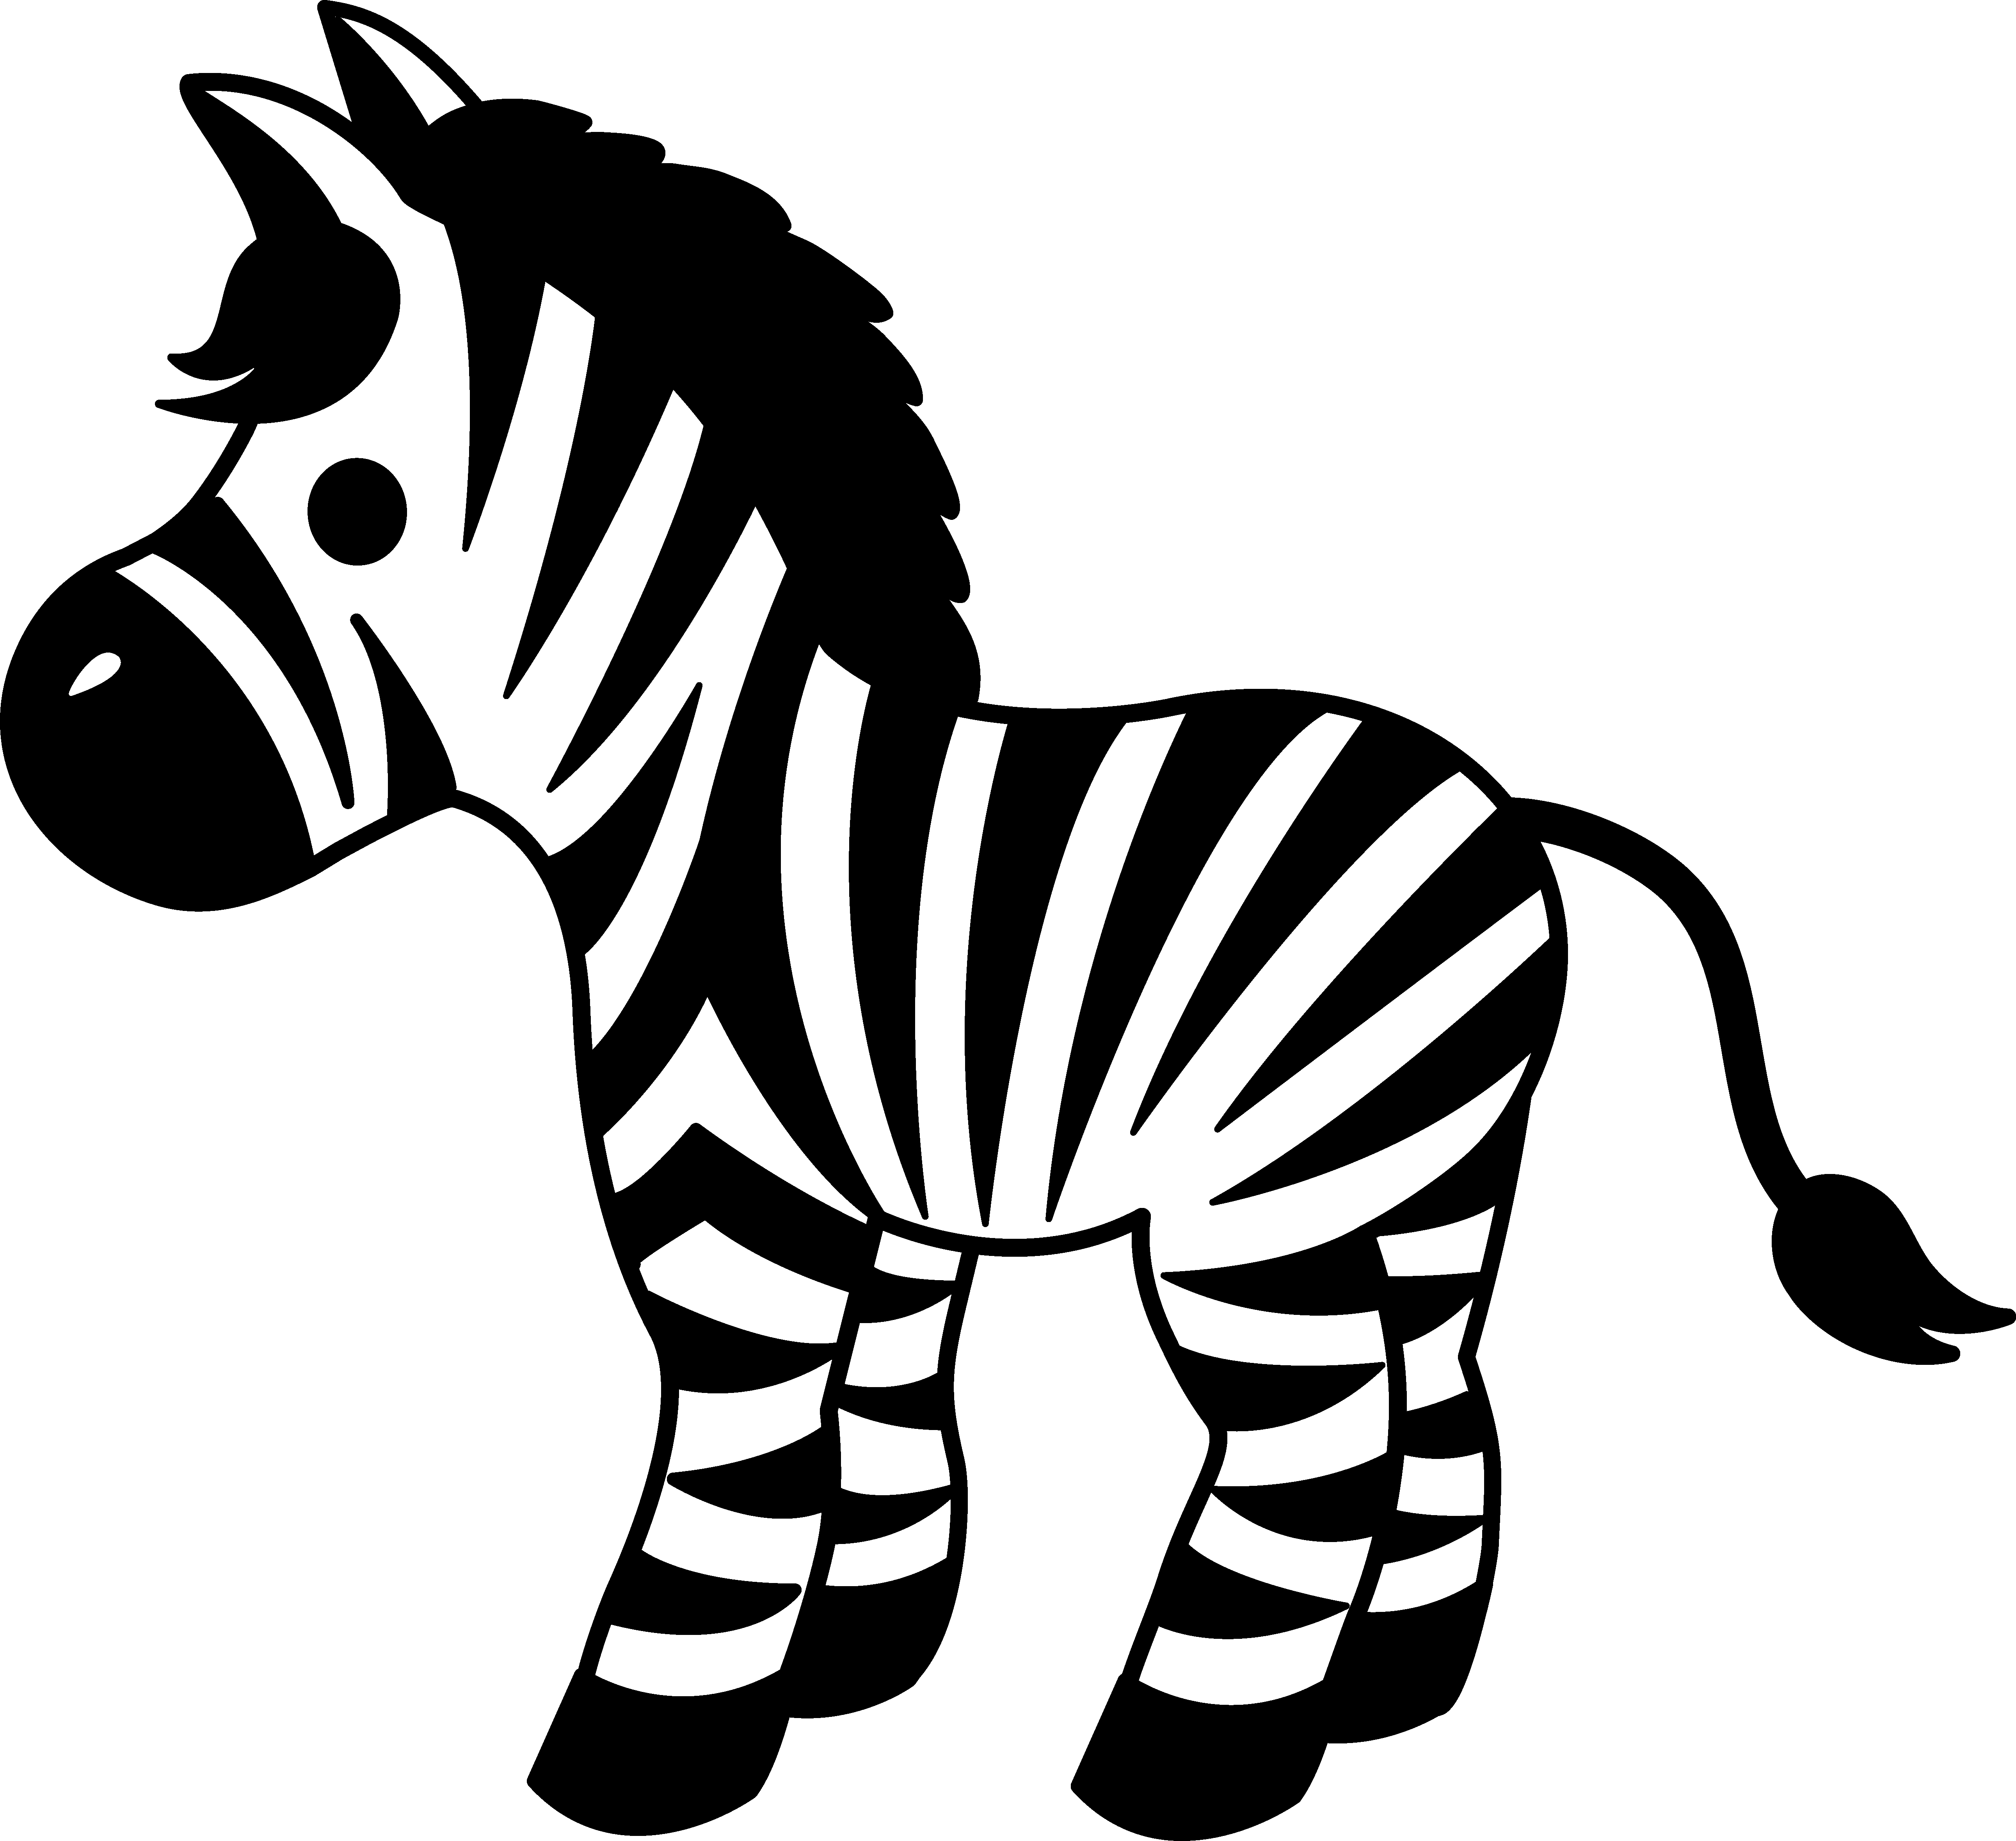 Zebra Clipart Black And White | Clipart library - Free Clipart Images